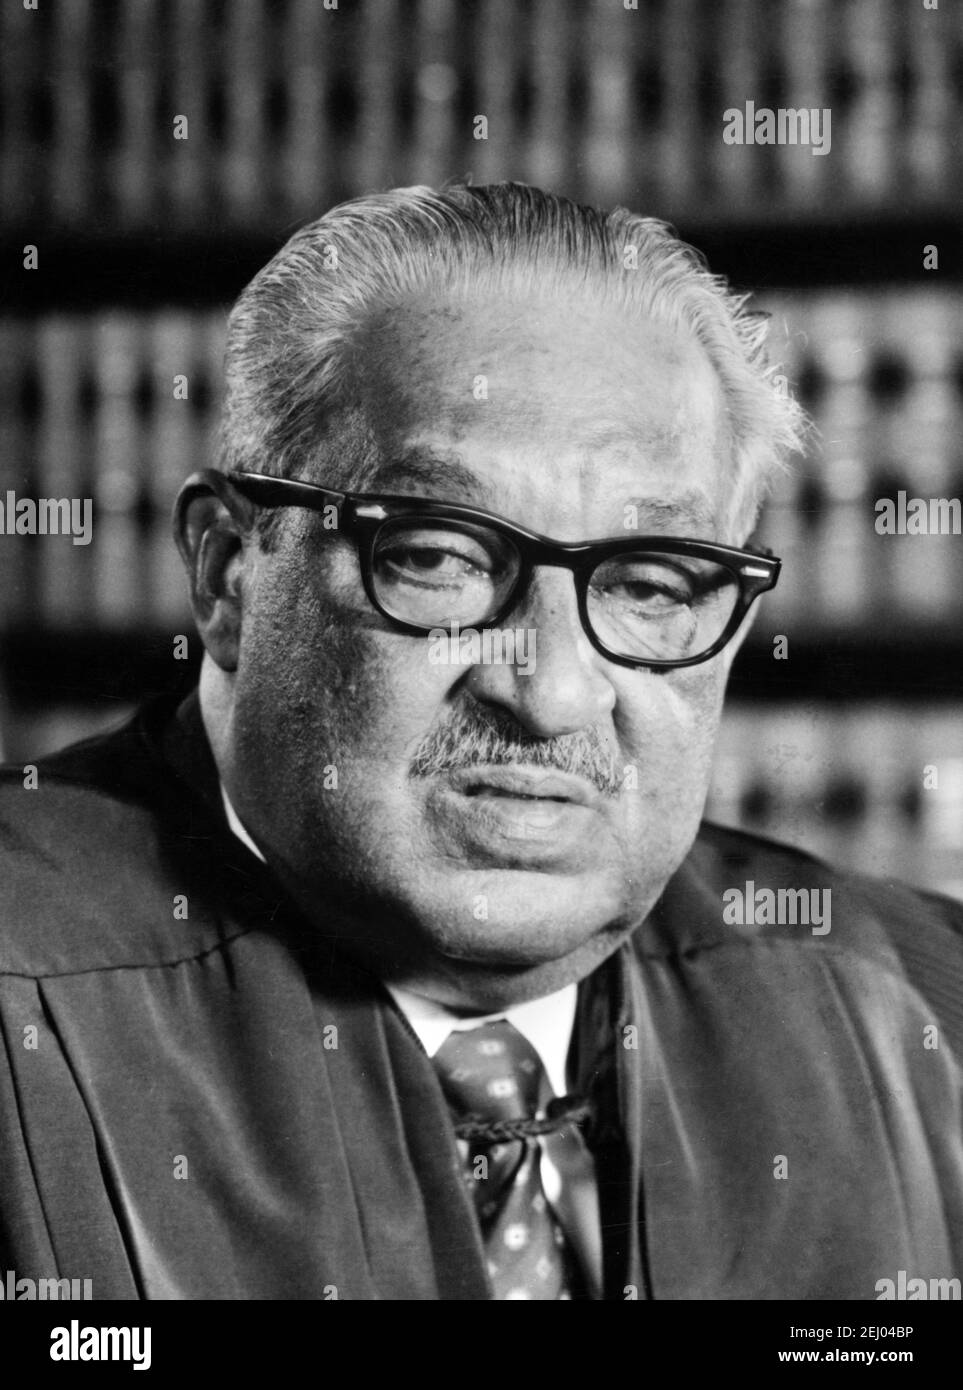 Thurgood Marshall. Portrait of the first African-American justice to serve on the United States Supreme Court, Thurgood Marshall (1908-1993) . Official photograph, 1976 Stock Photo